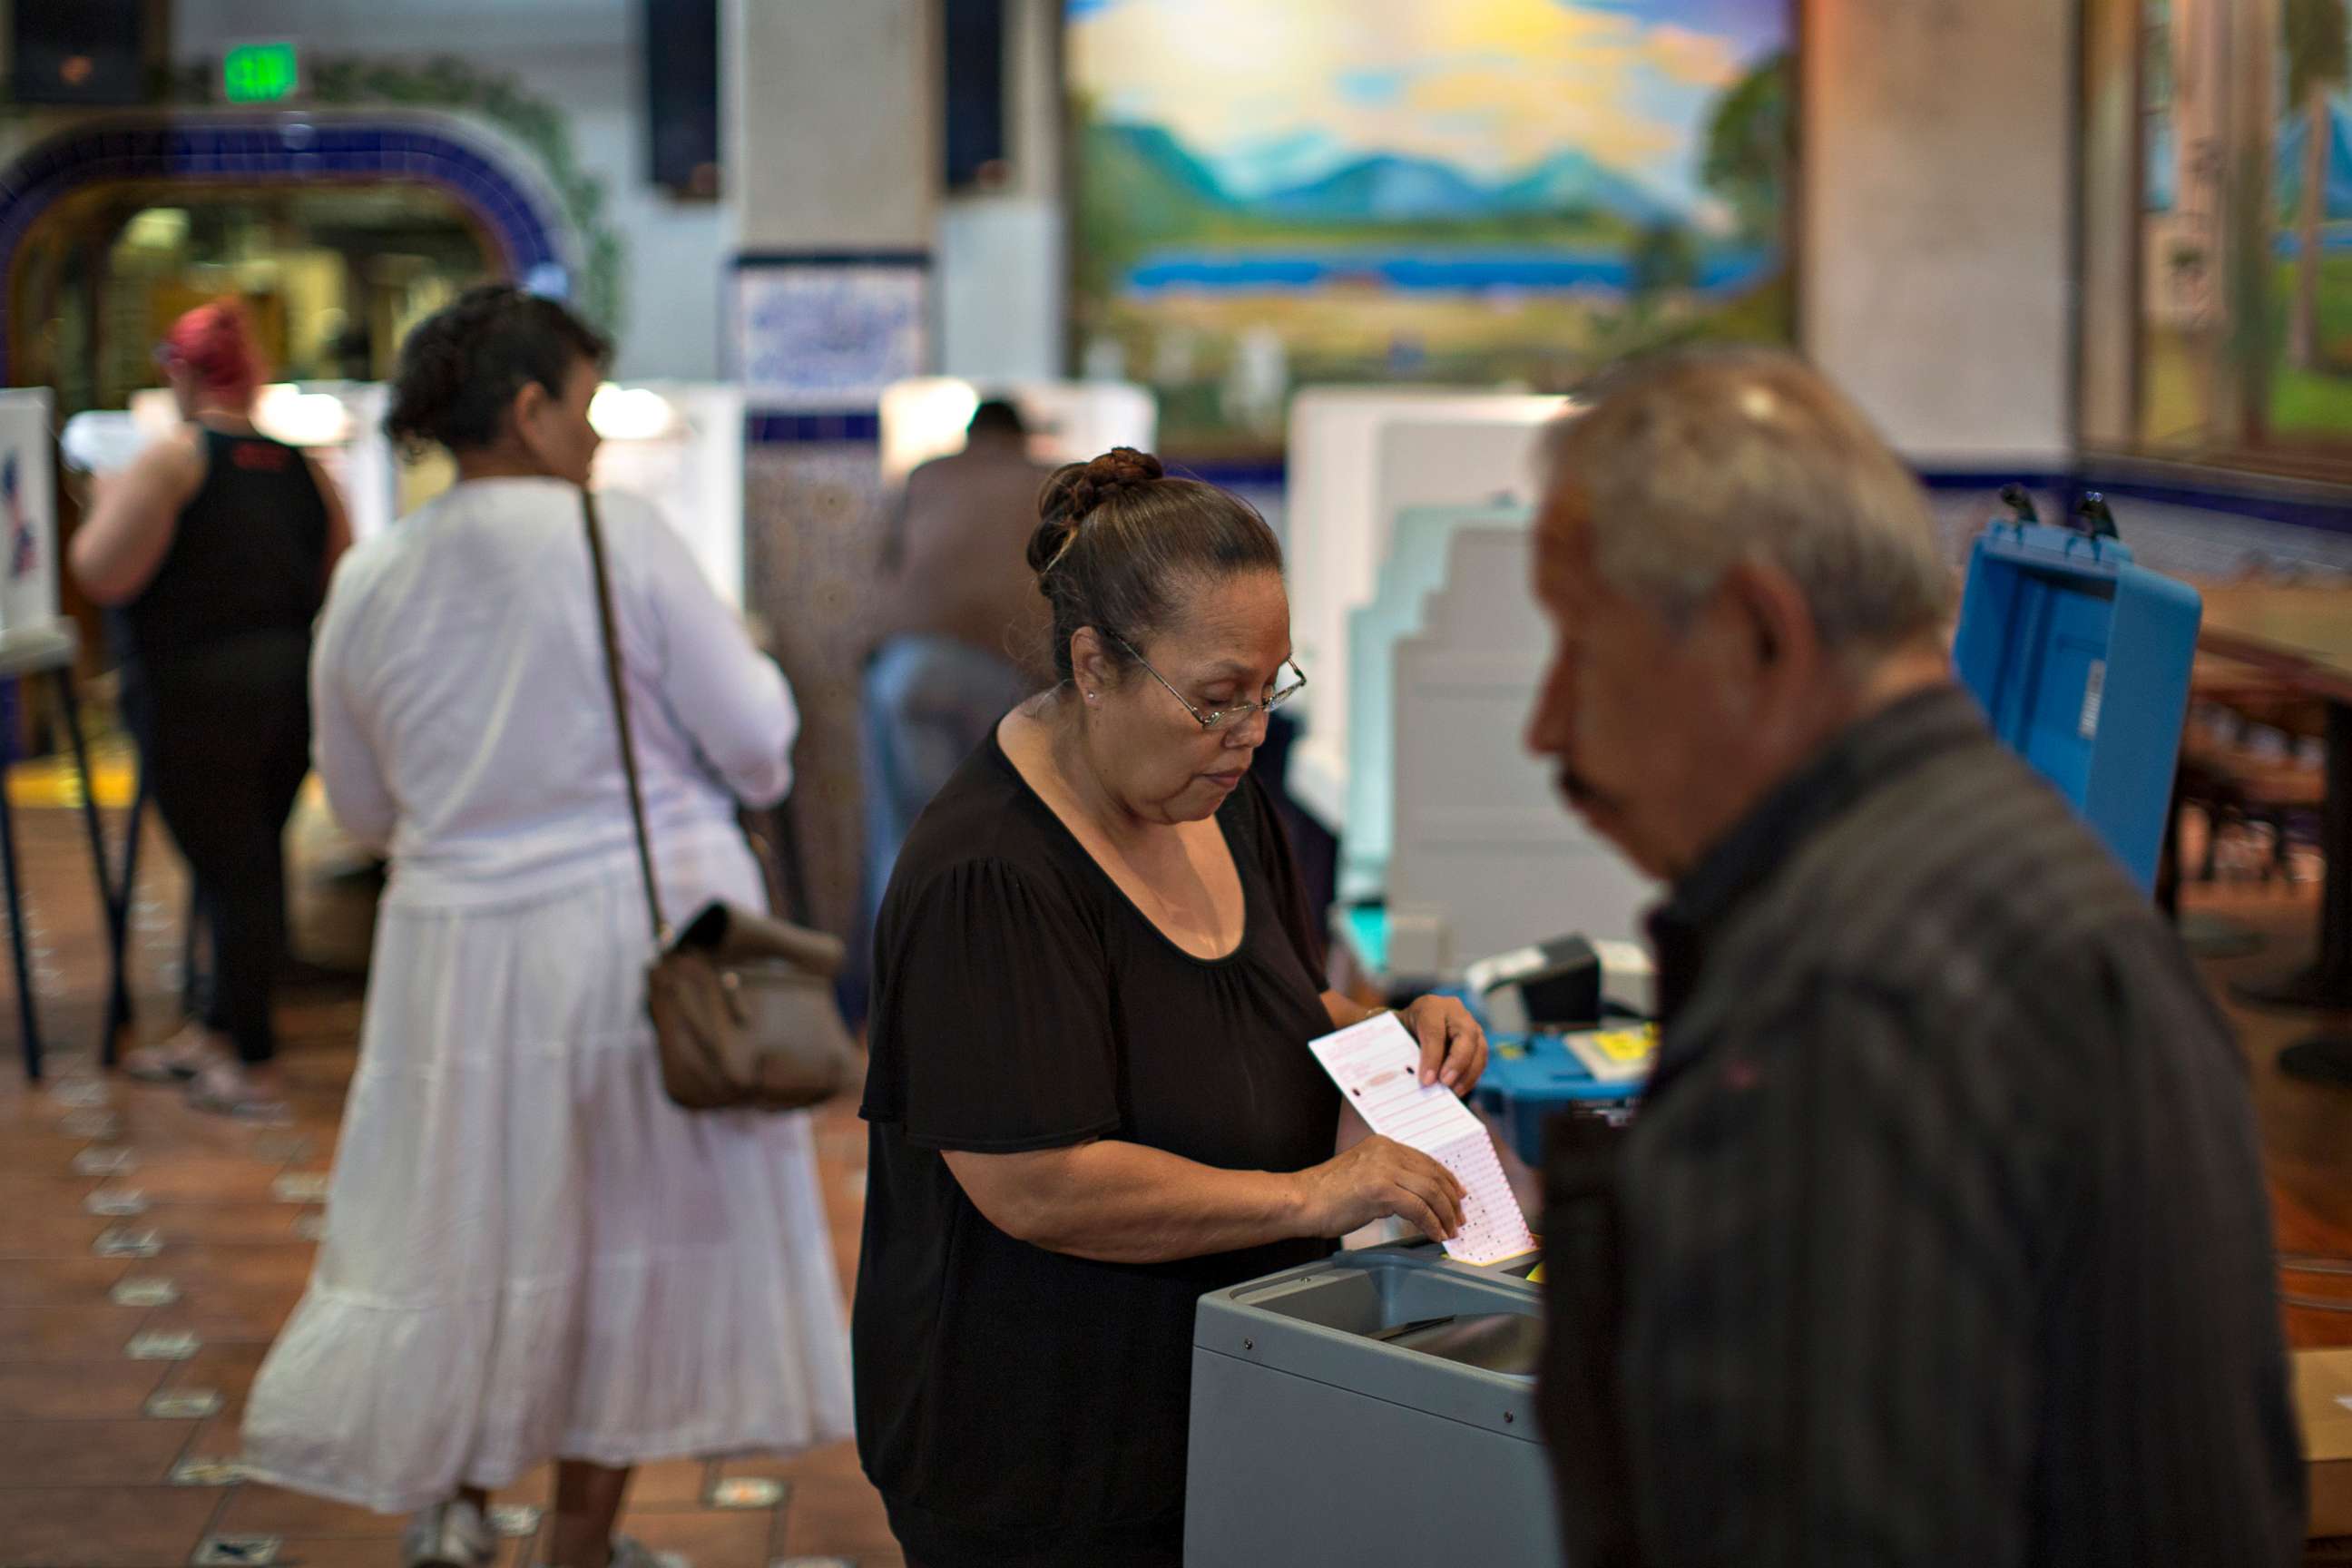 PHOTO: Latinos vote at a polling station in El Gallo Restaurant on Nov. 8, 2016 in the Boyle Heights section of Los Angeles.